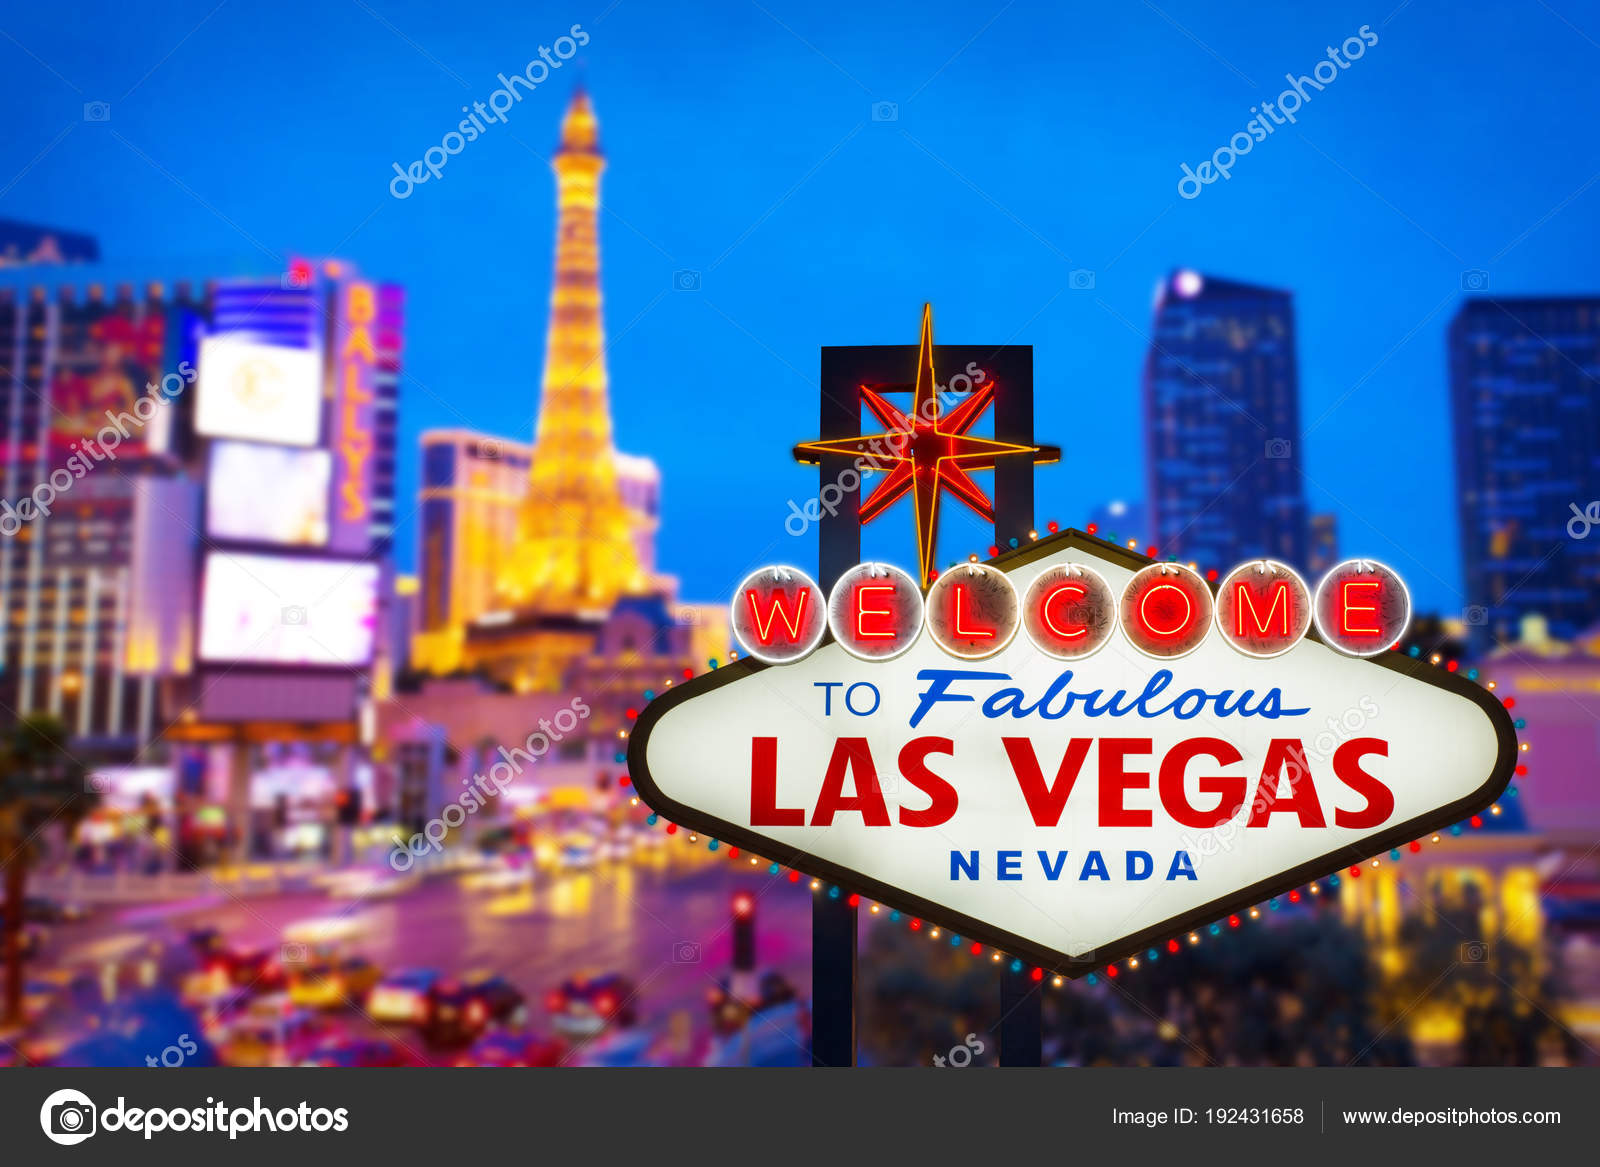 Welcome to Las Vegas Photography Backdrops